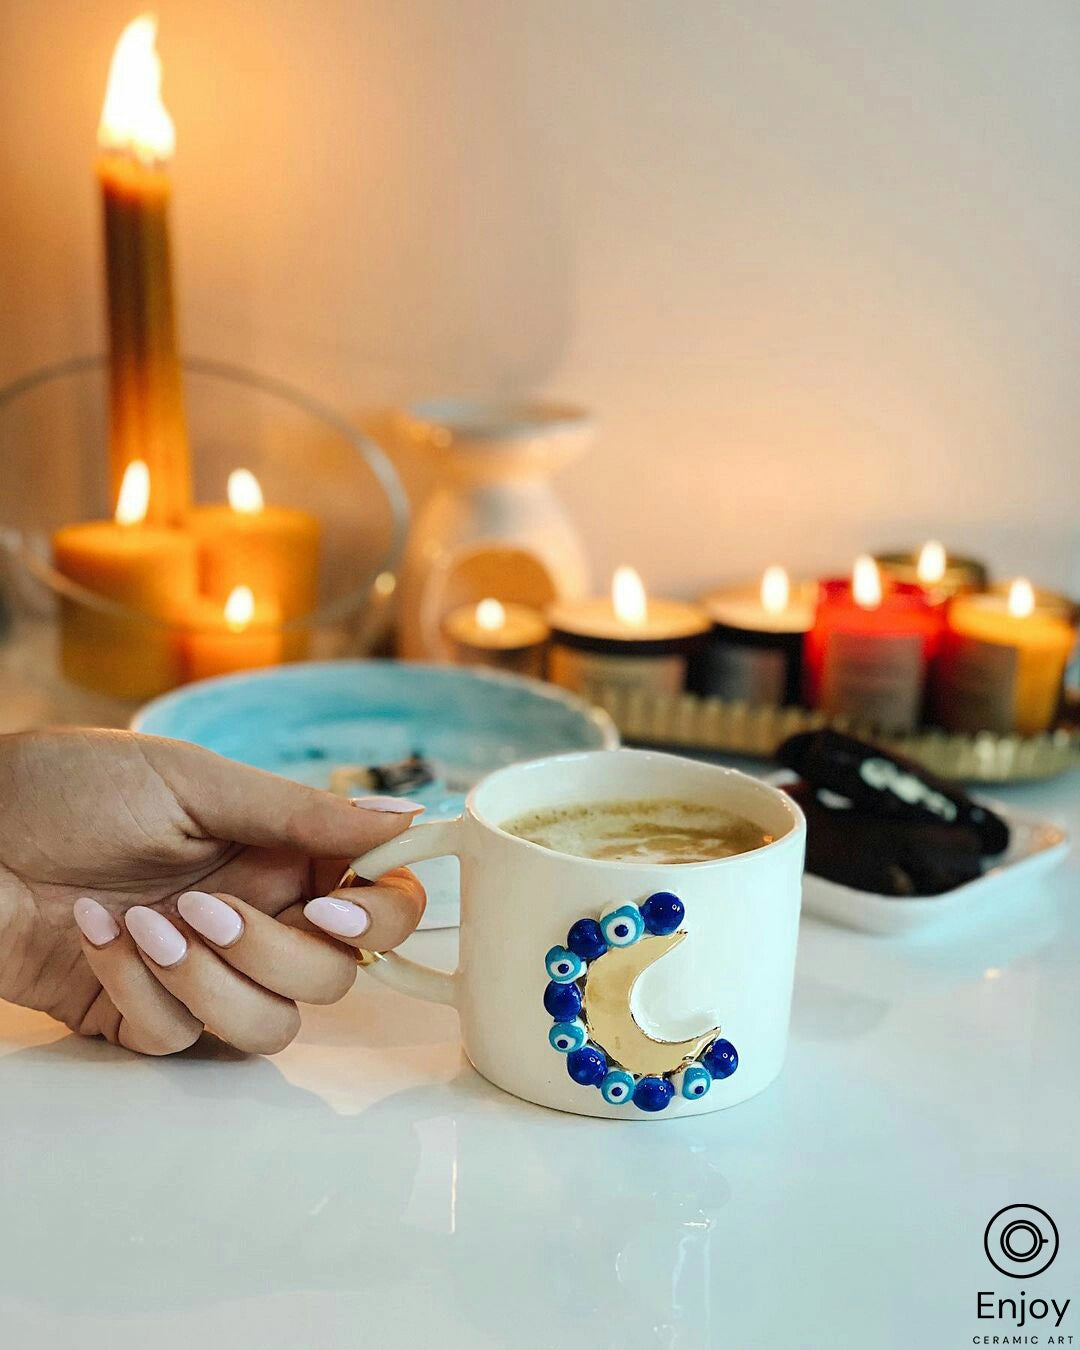 A hand holding a 'Blue Moon' ceramic mug with a golden crescent moon and blue evil eye beads, against a serene backdrop of soft candlelight.